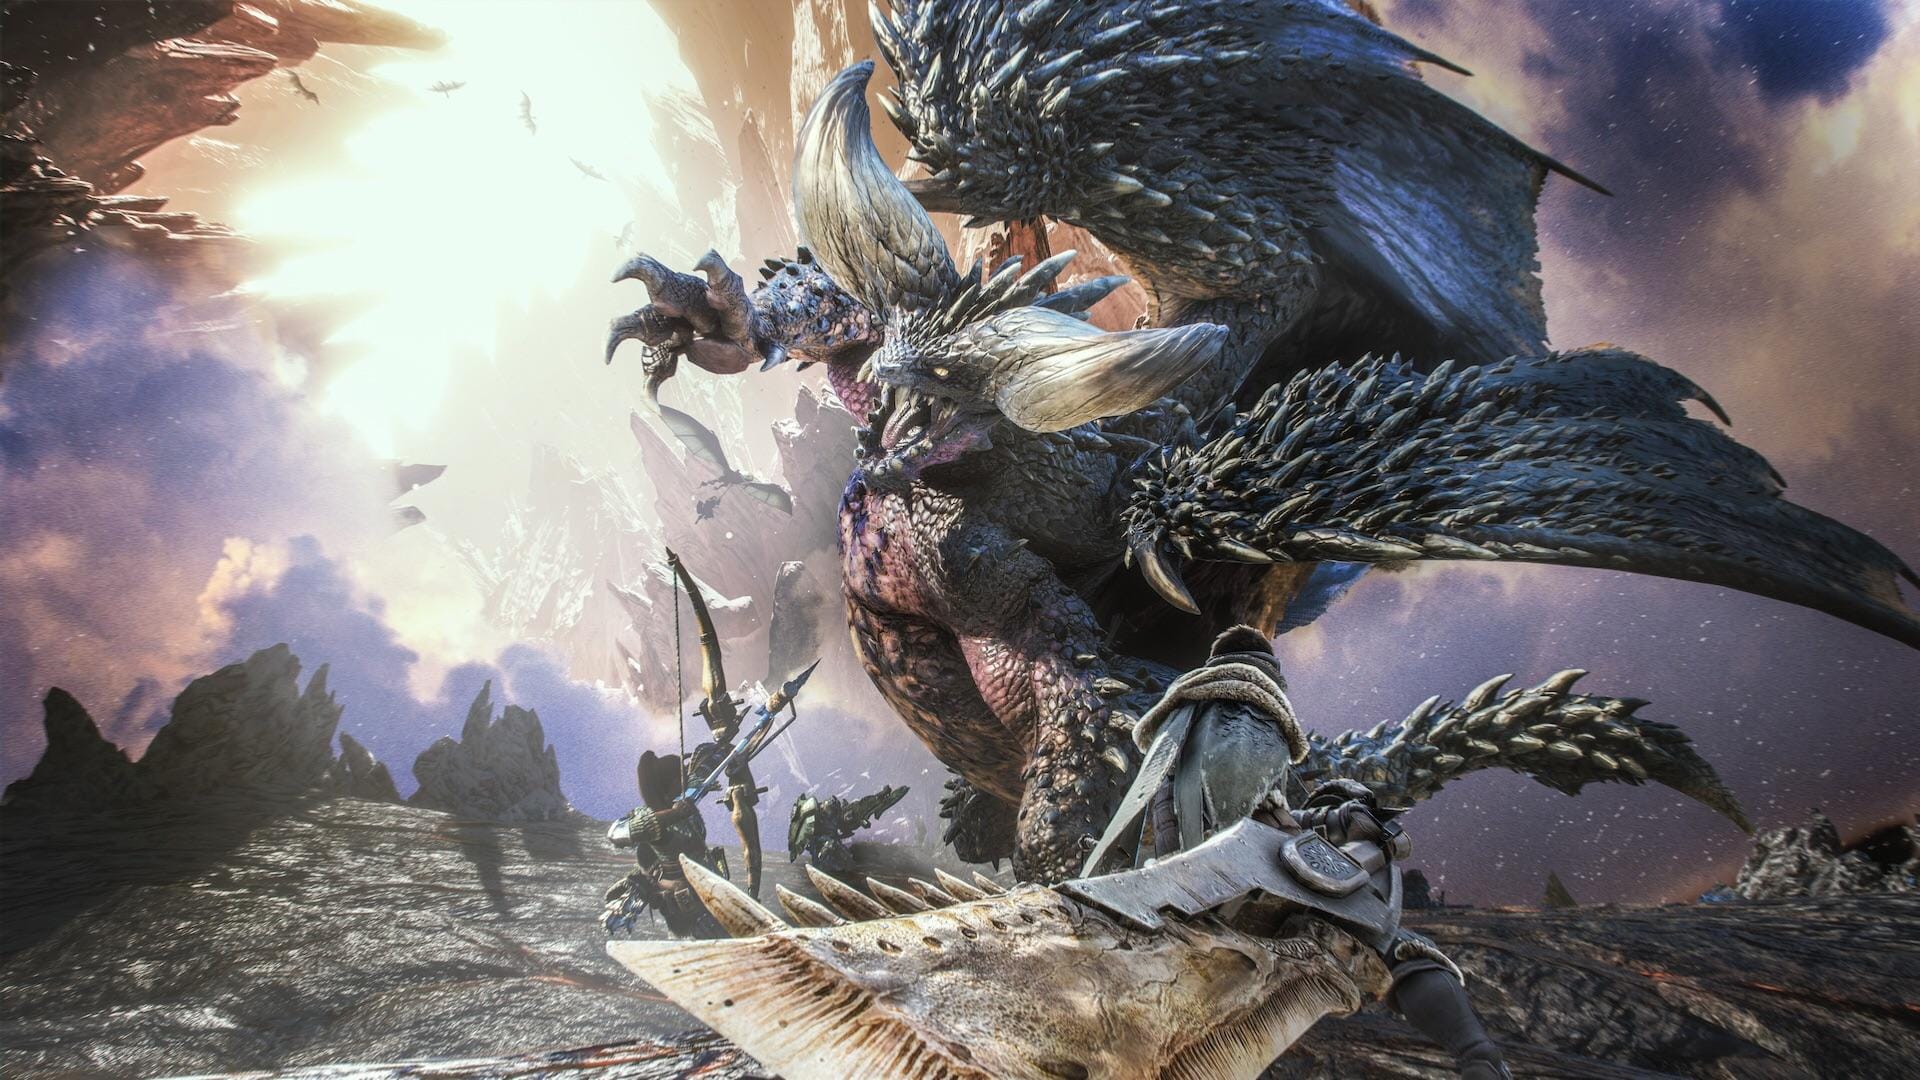 Screenshot of the Monster Hunter franchise which is now coming to mobile devices this September as 'Monster Hunter Now'